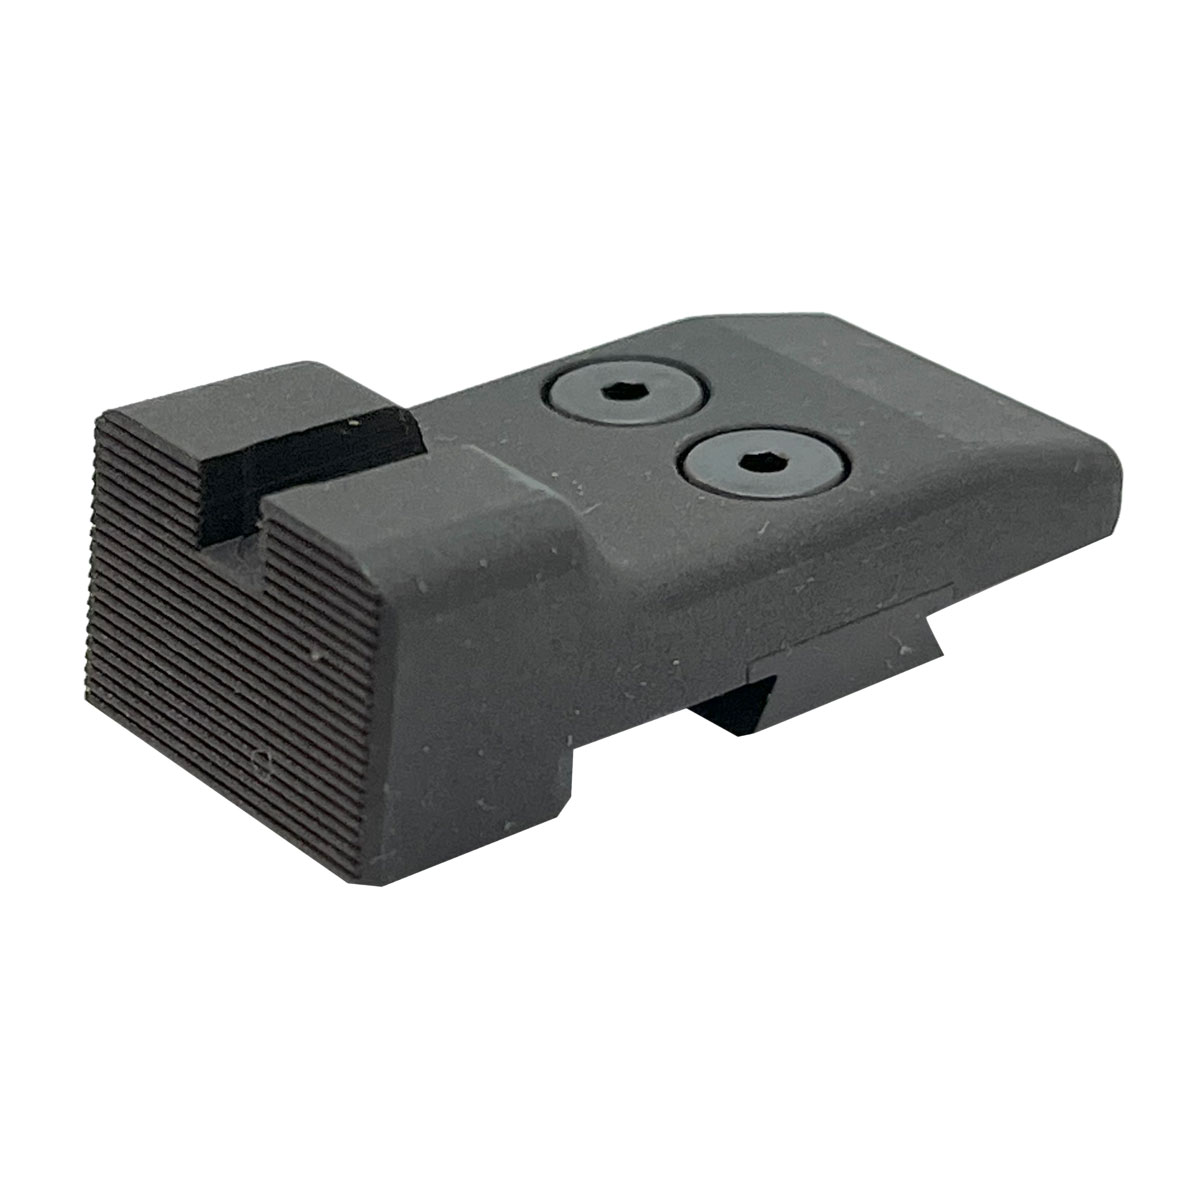 HARRISON DESIGN & CONSULTING - REAR SIGHT FOR RUGER SR1911™